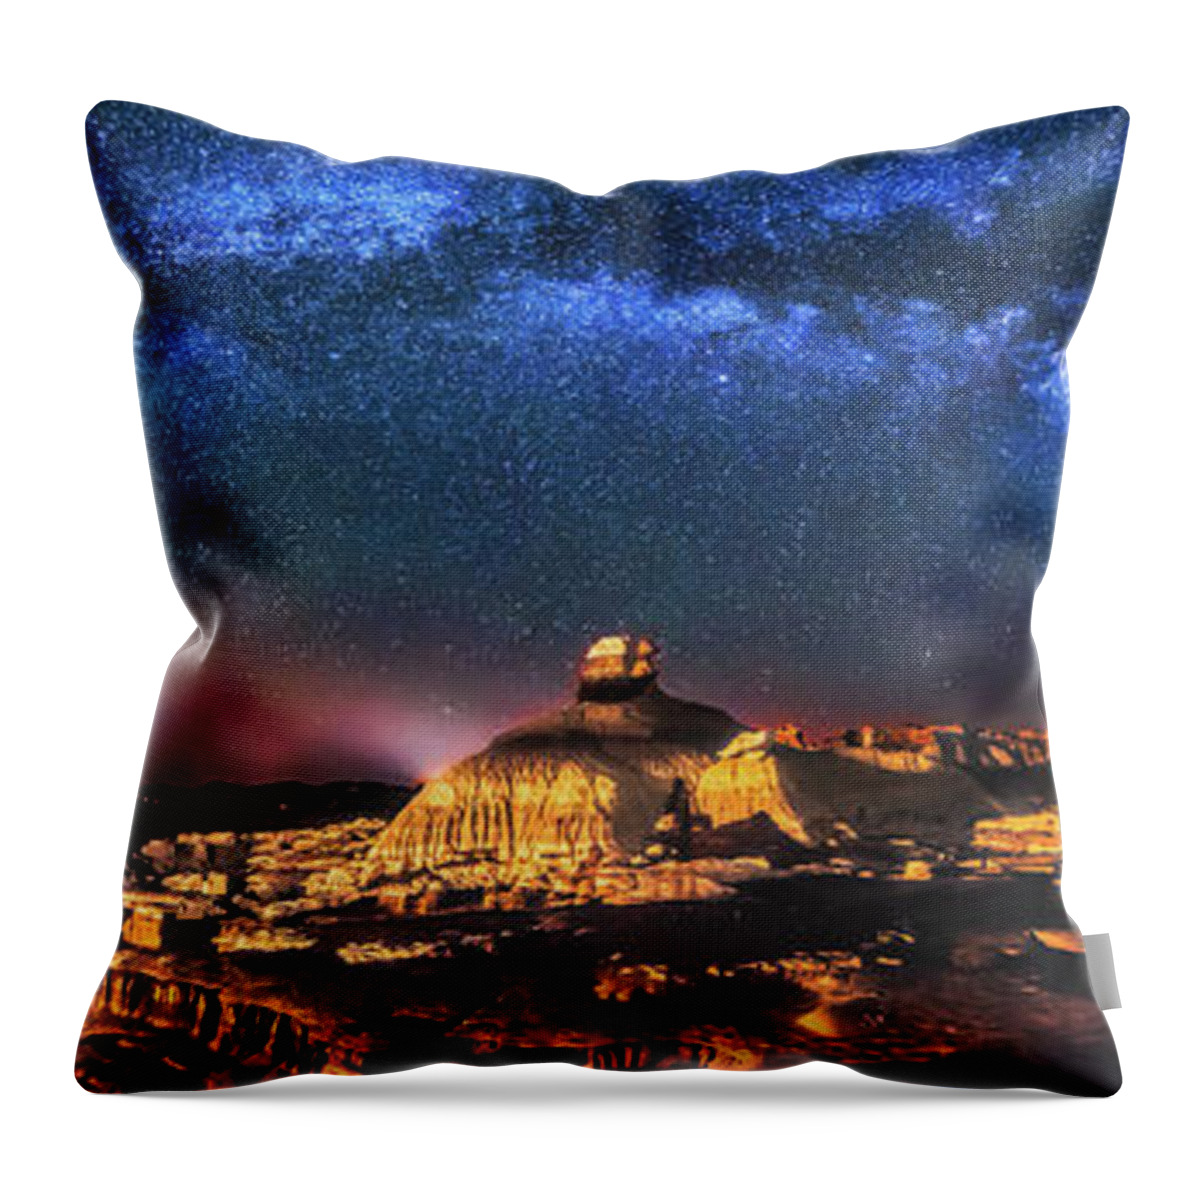 Bisti Badlands Throw Pillow featuring the photograph Dreams of Bisti Badlands by Robert Loe